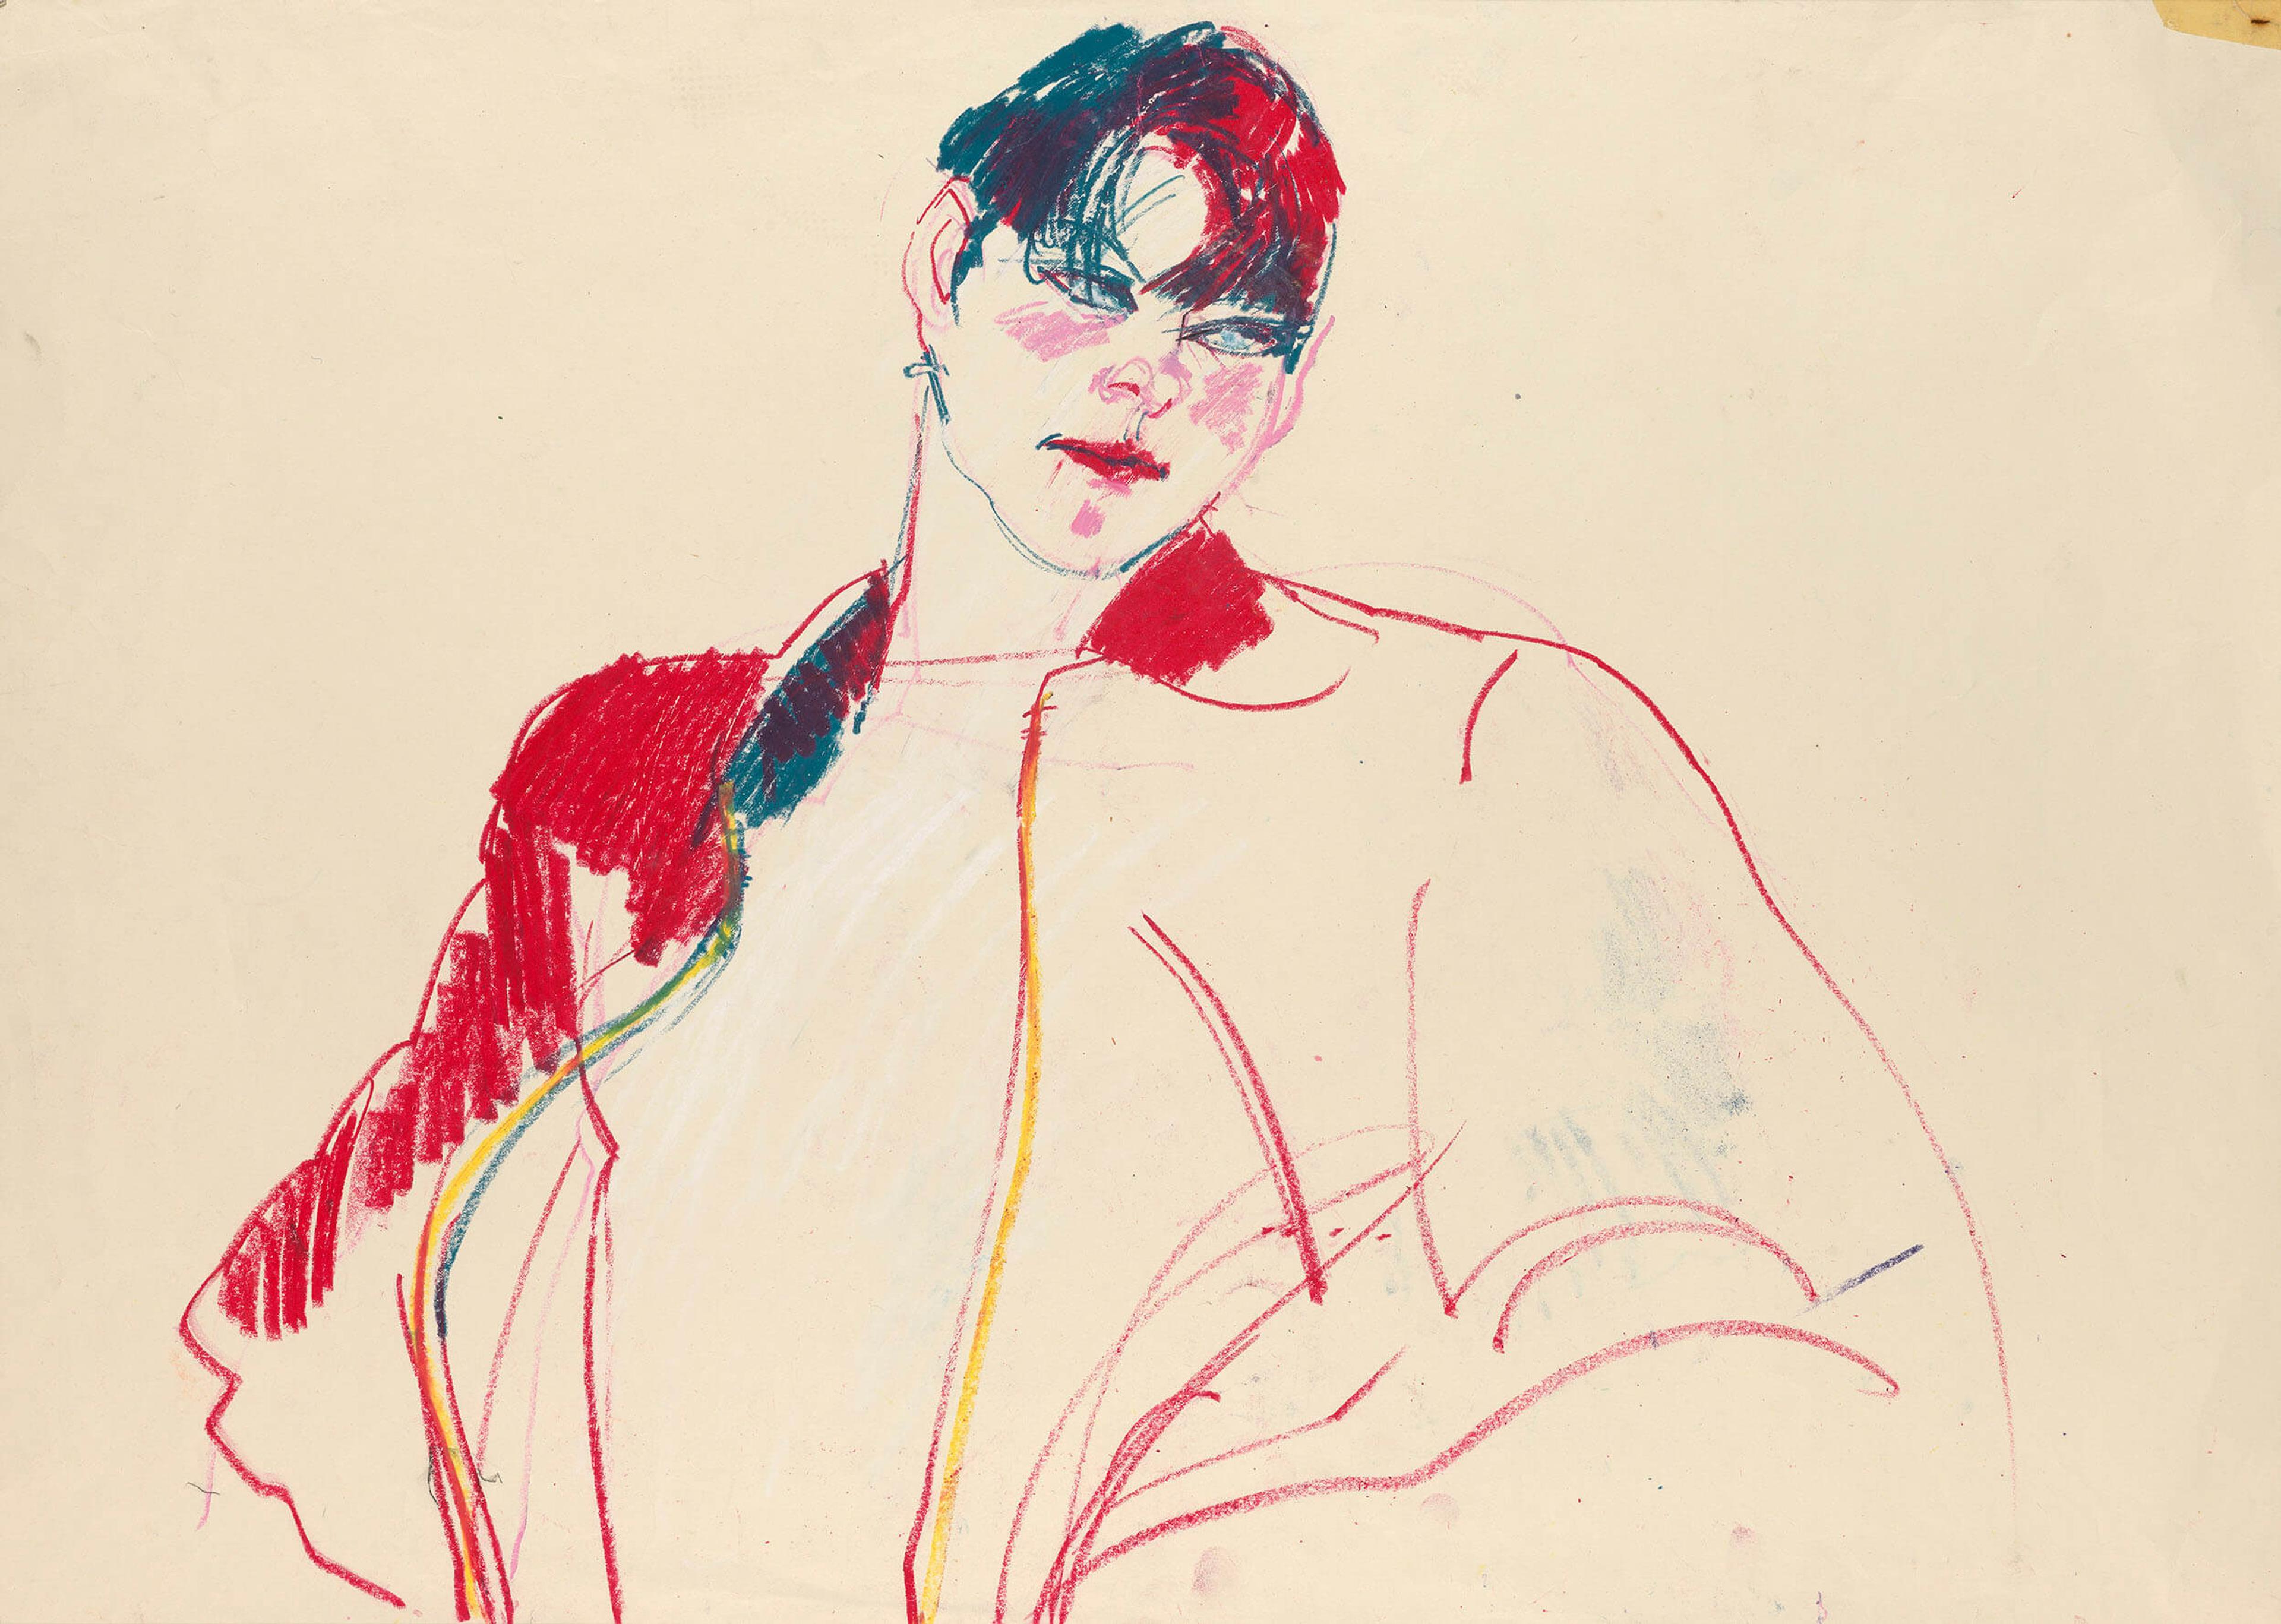 Drawing of a person with short hair and an oversized jacket drawn in red and blue line